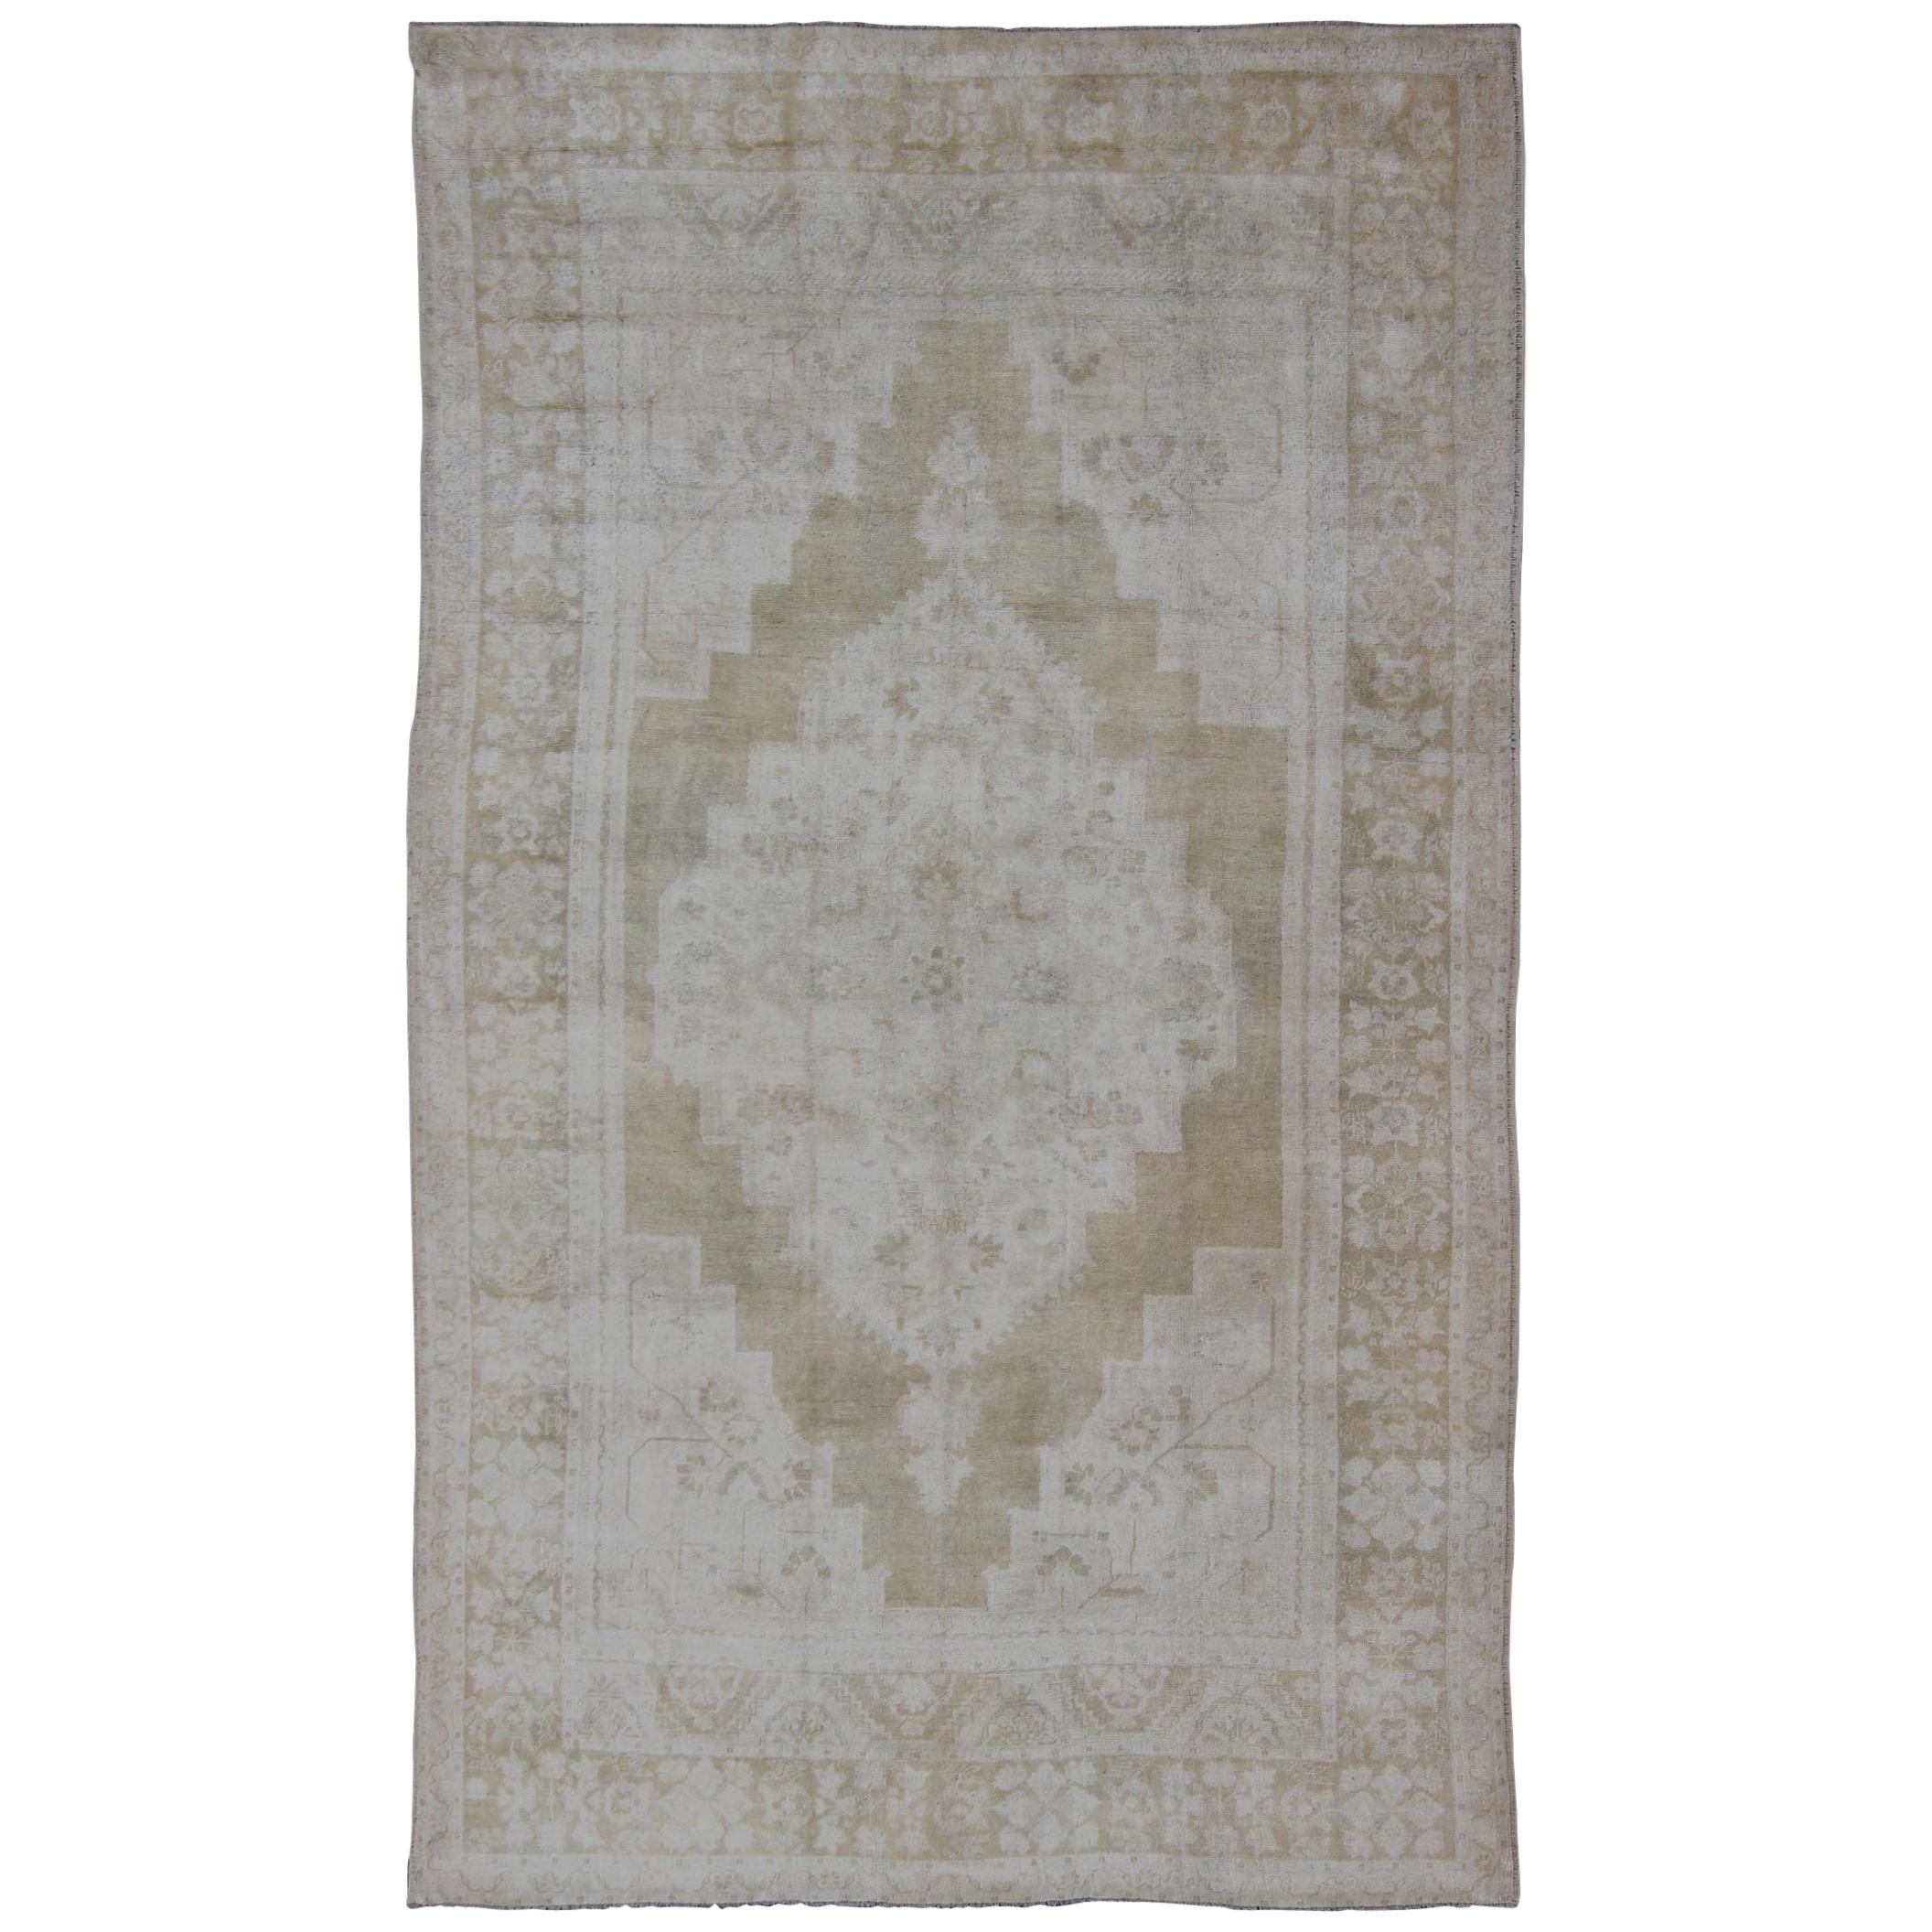 Medallion Design Vintage Oushak Rug in Muted Tones of Faded Yellow and Neutrals For Sale